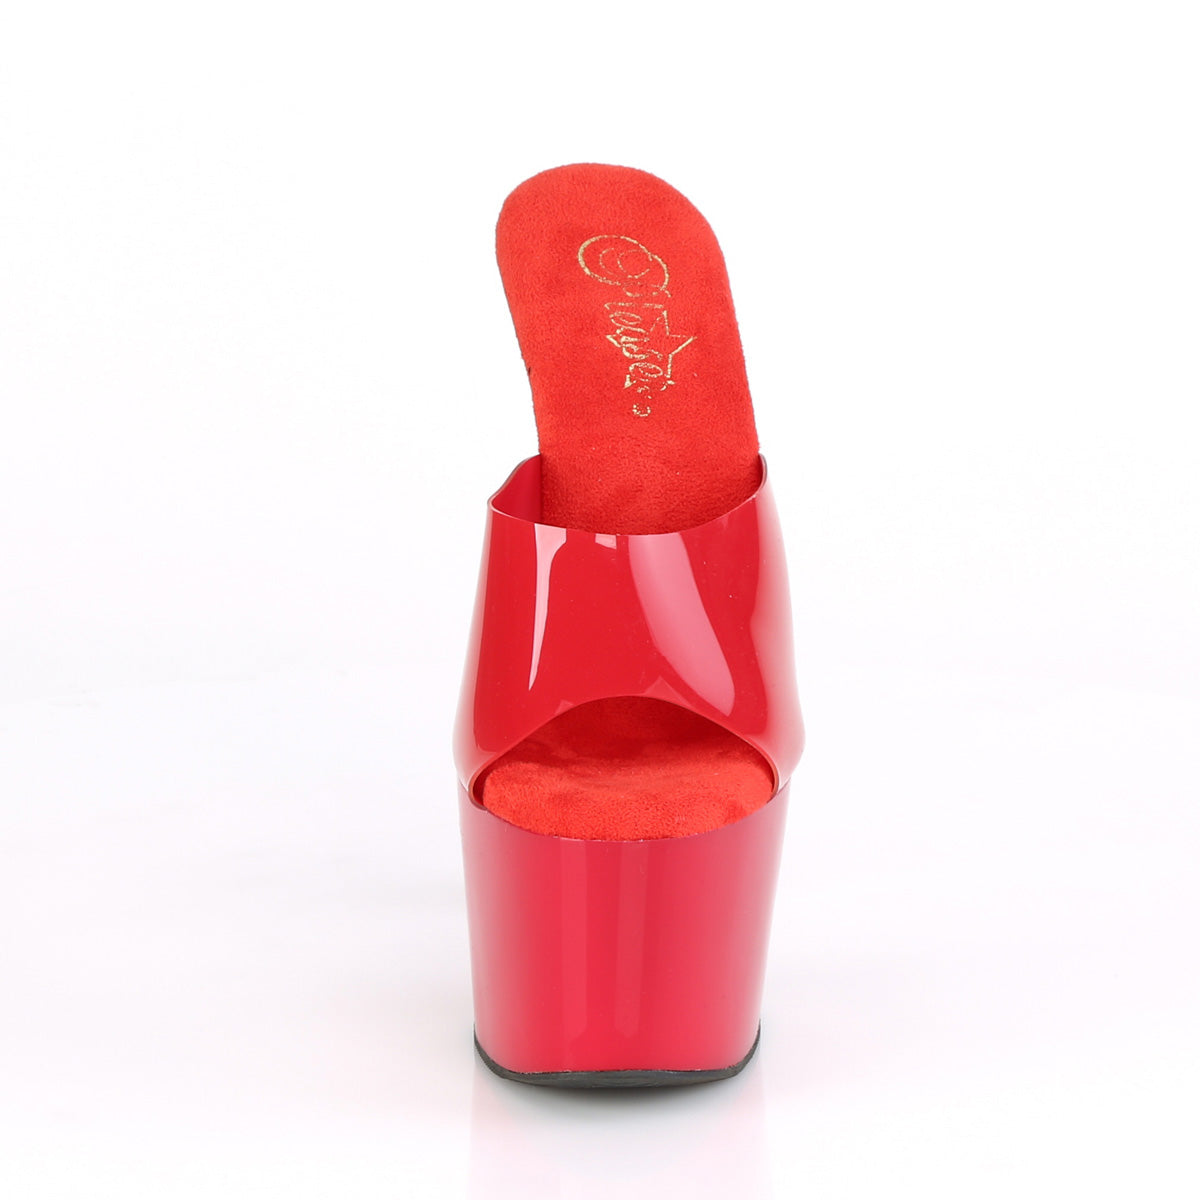 ADORE-701N Pleaser 7 Inch Heel Red Pole Dancing Shoes-Pleaser- Sexy Shoes Alternative Footwear